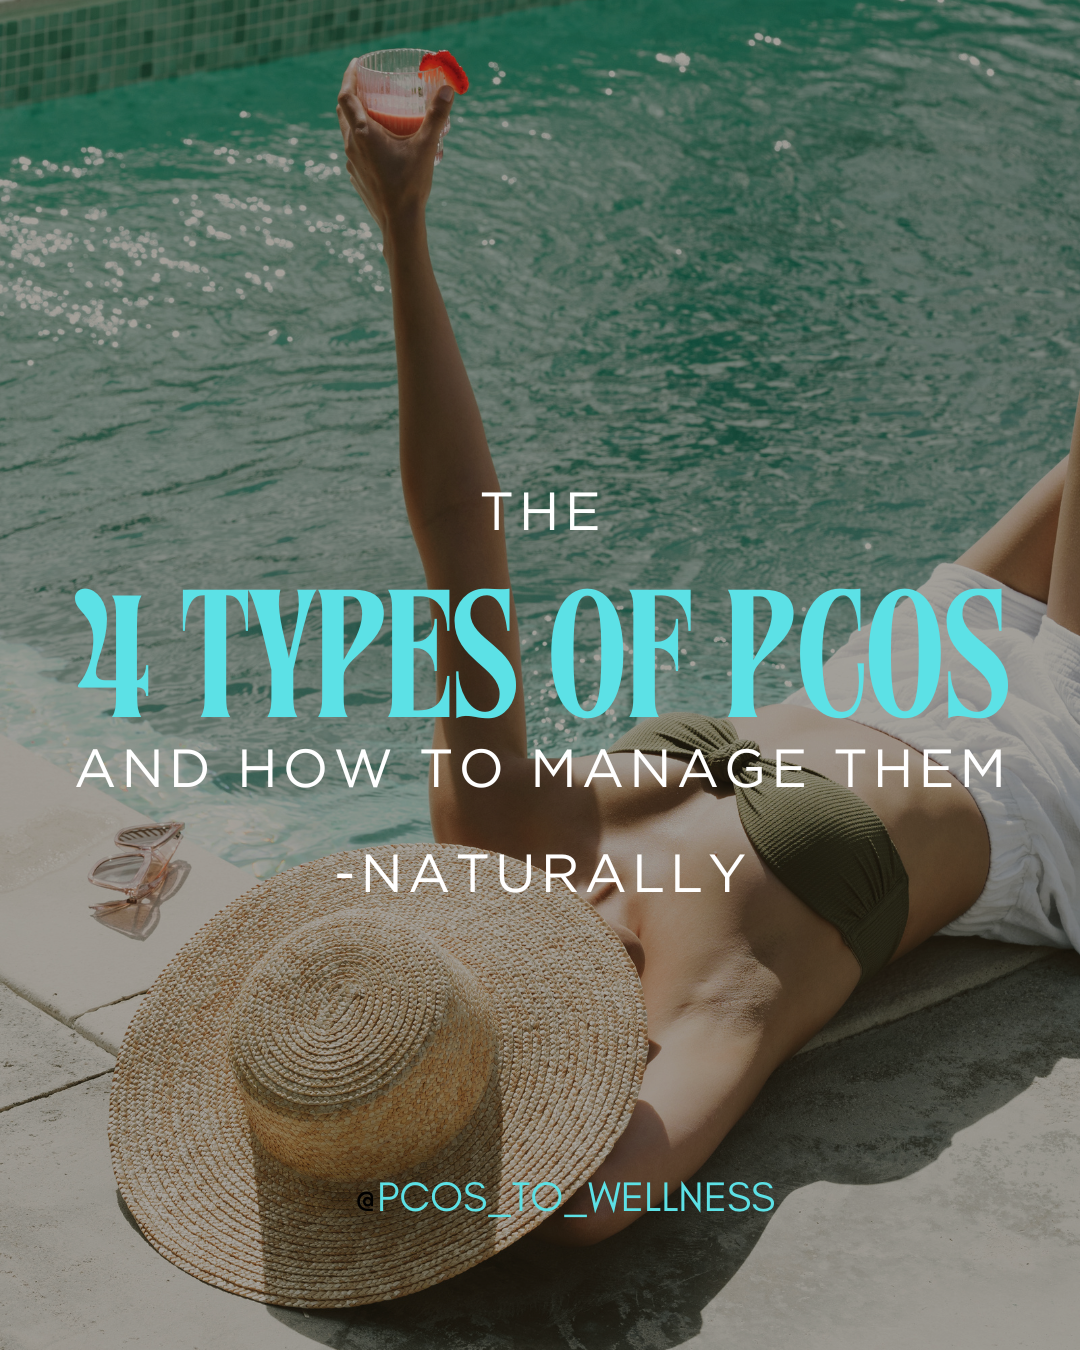 The 4 types of PCOS and how to manage them- naturally